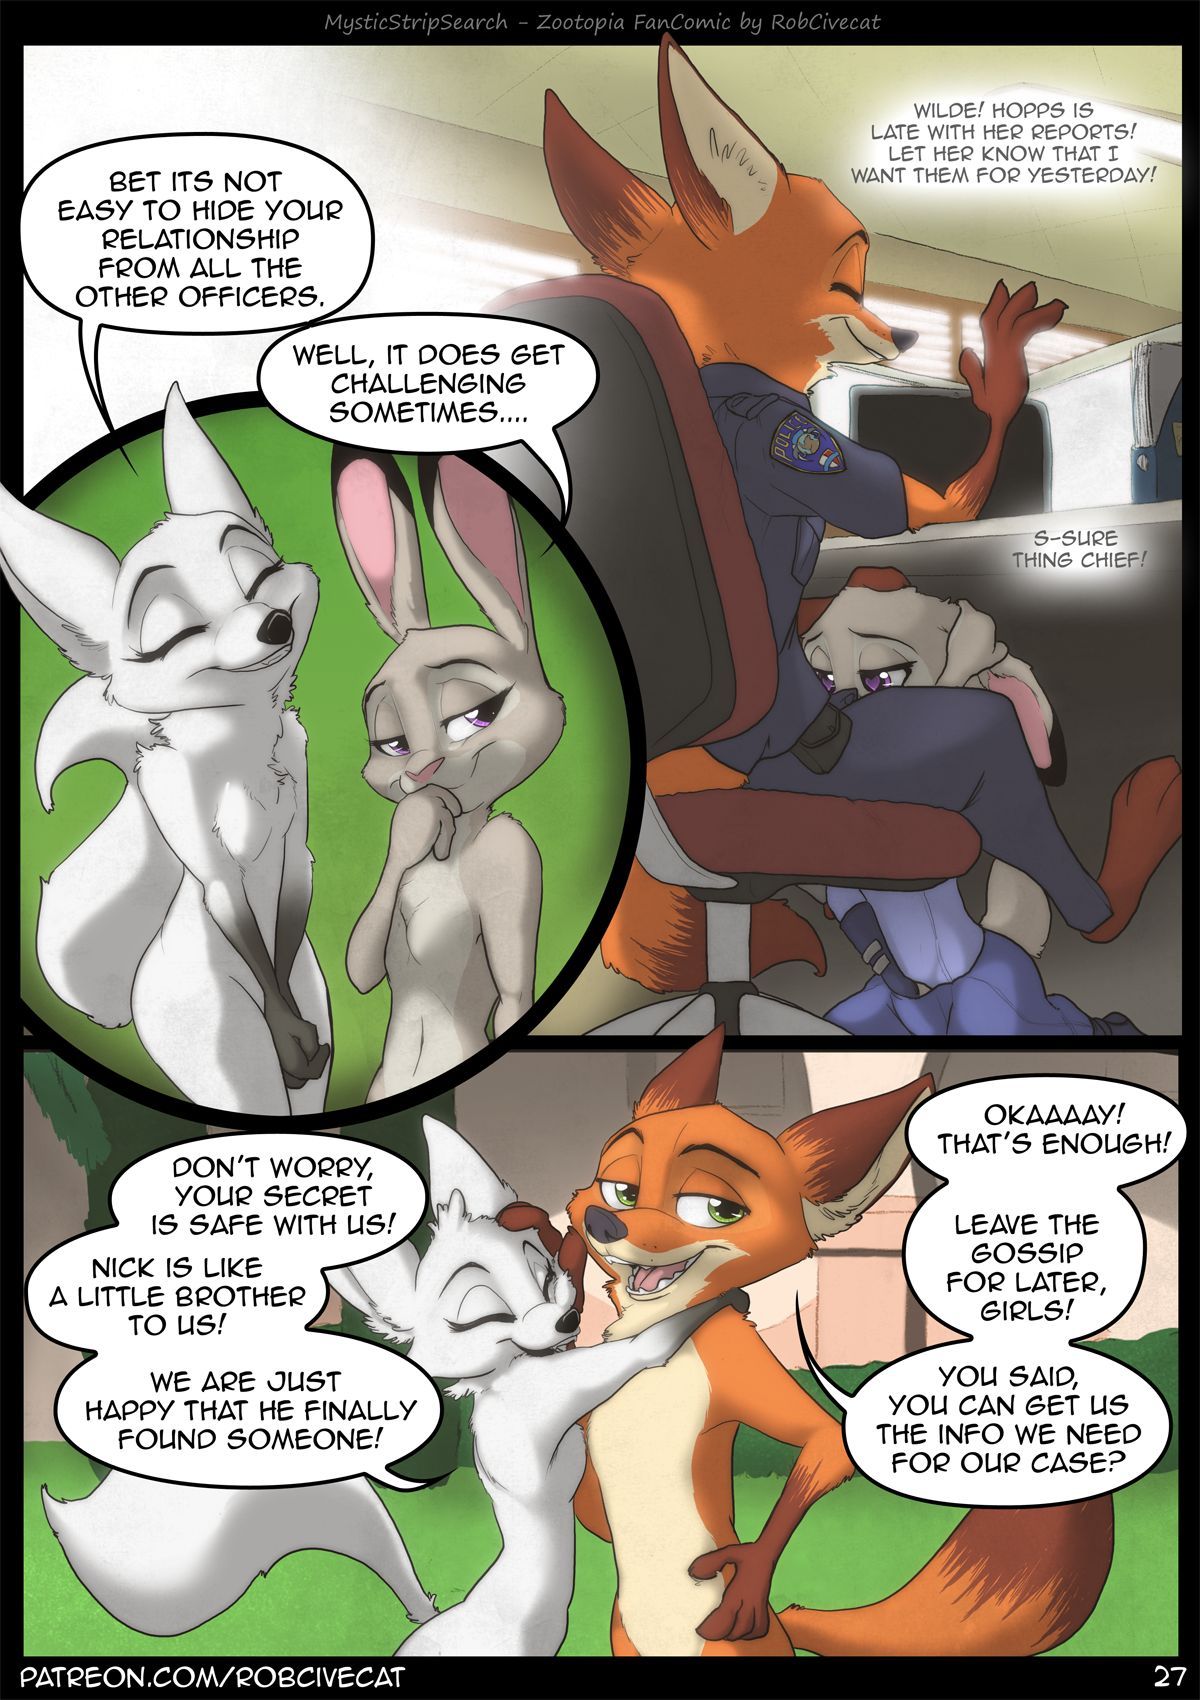 [RobCivecat] Mystic Strip Search (Zootopia) [Ongoing] 28